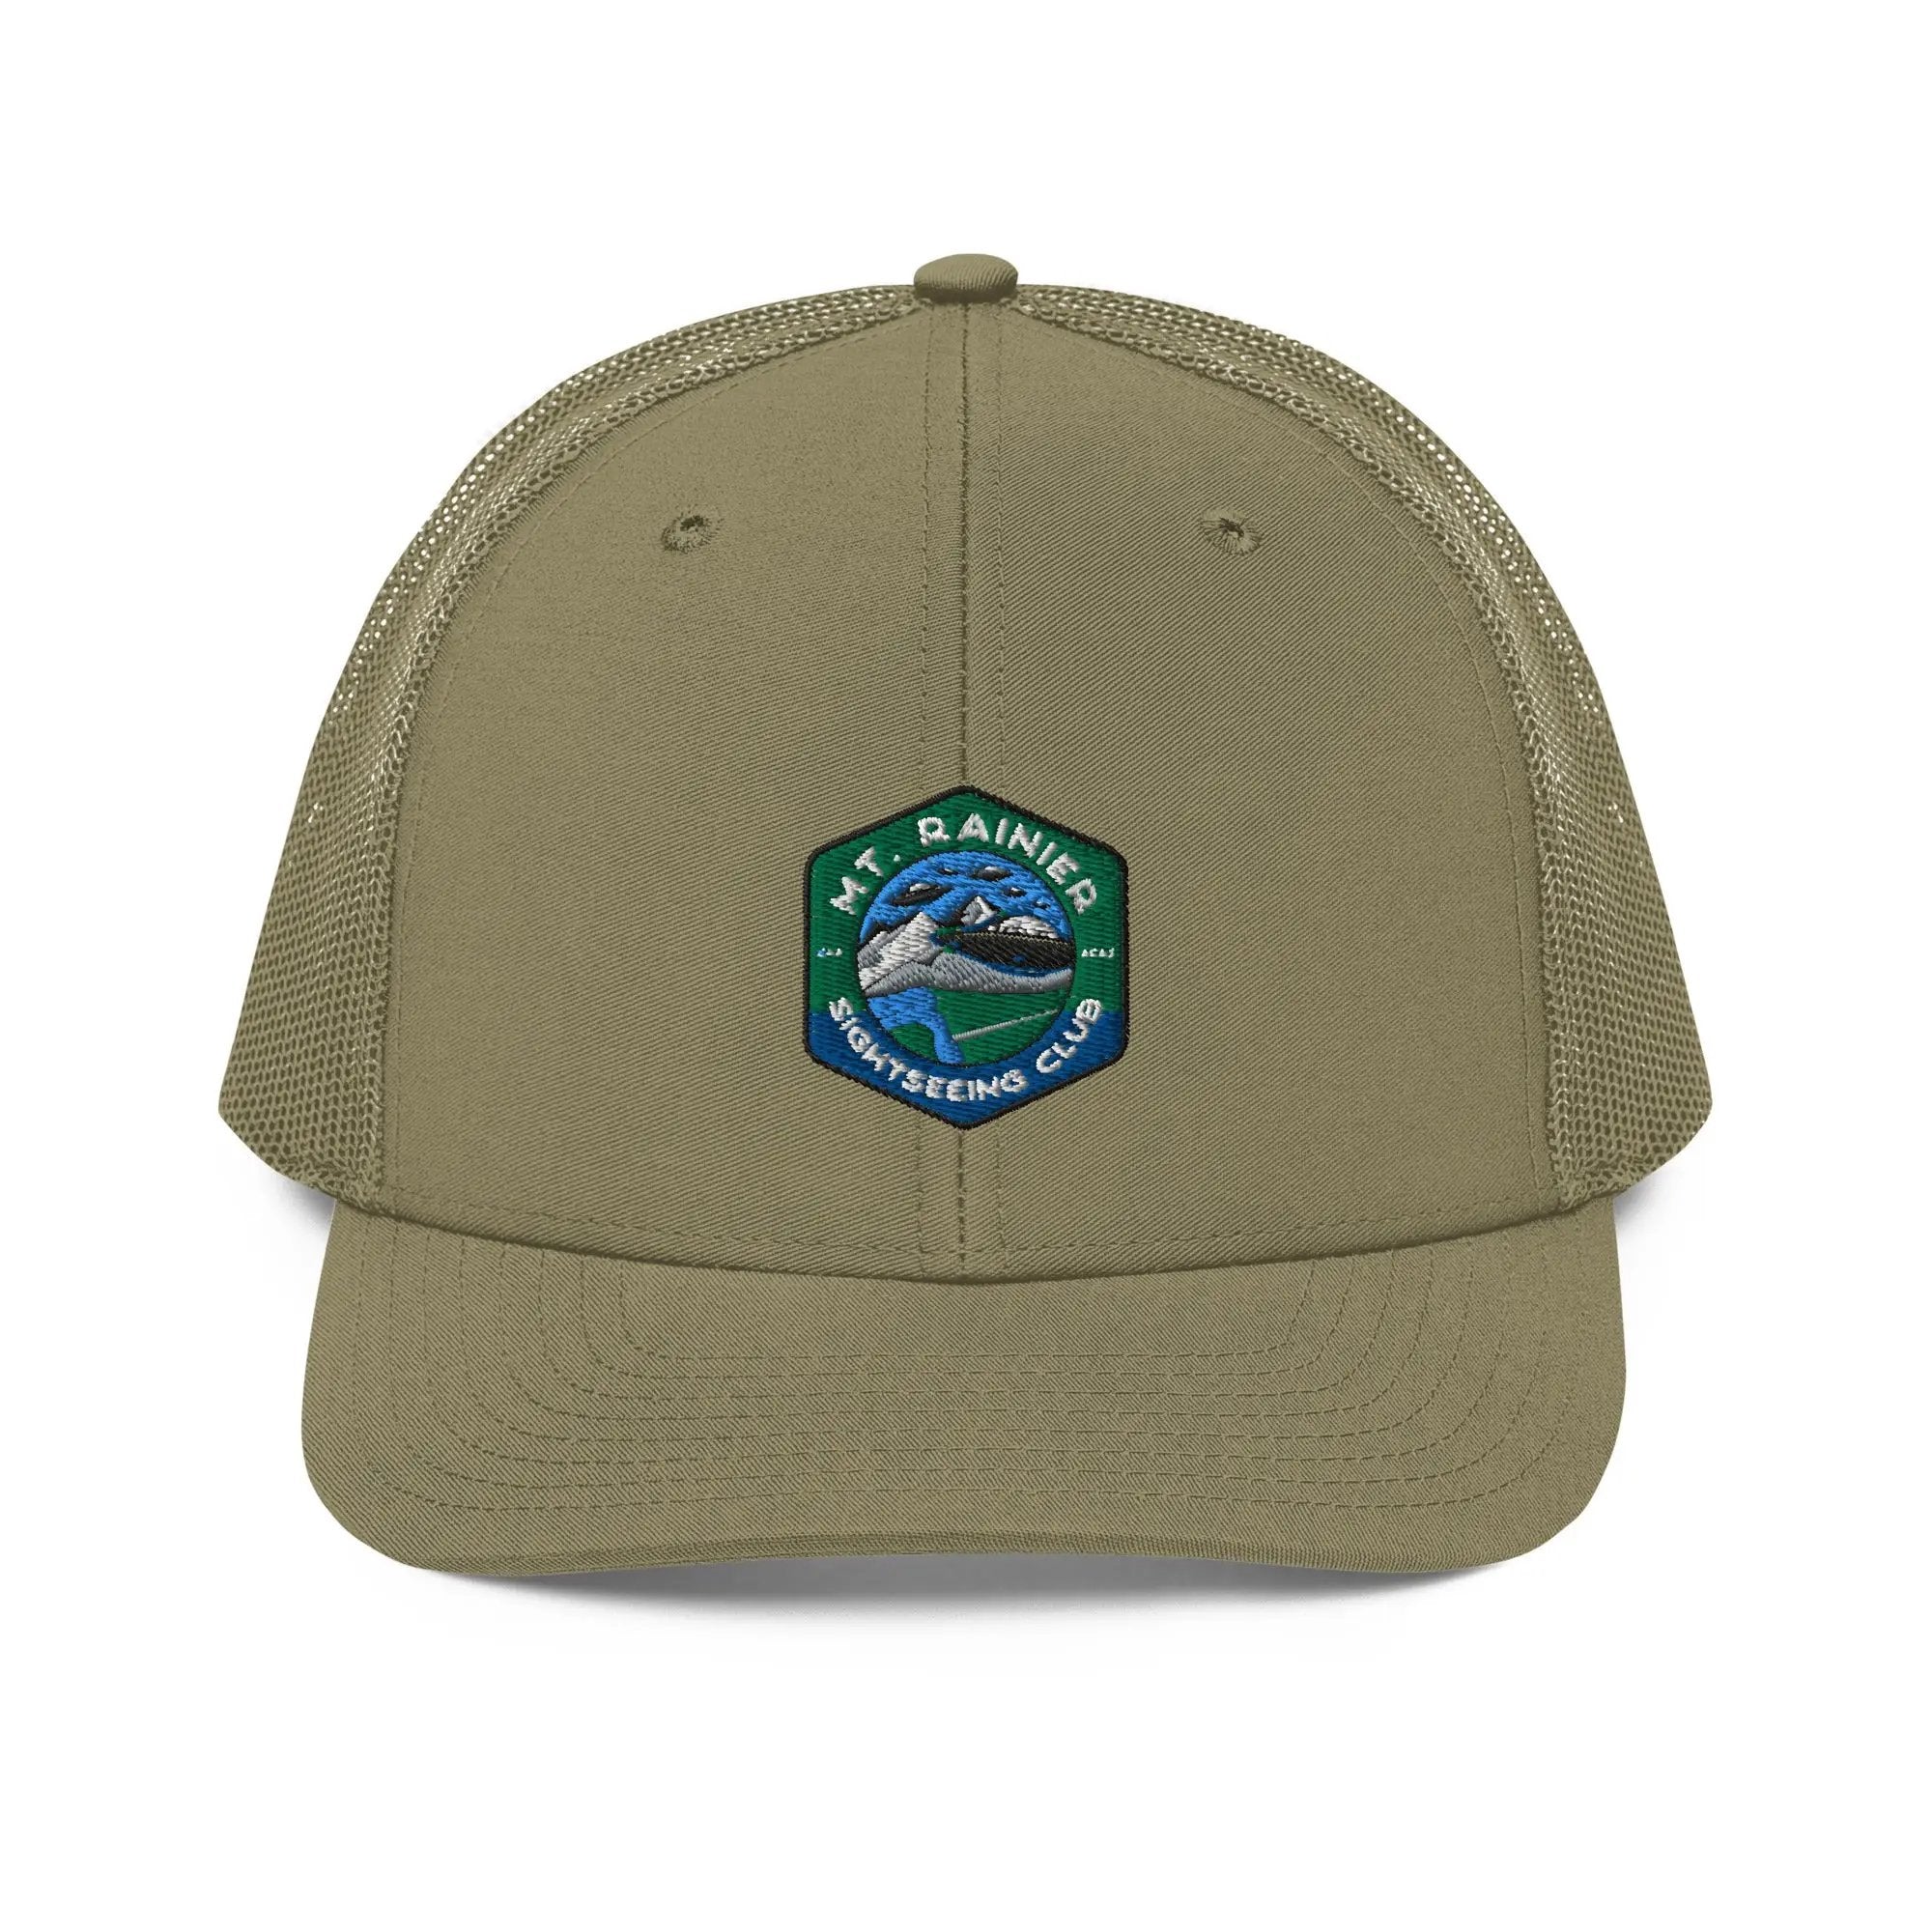 a khaki trucker hat with a patch on the front